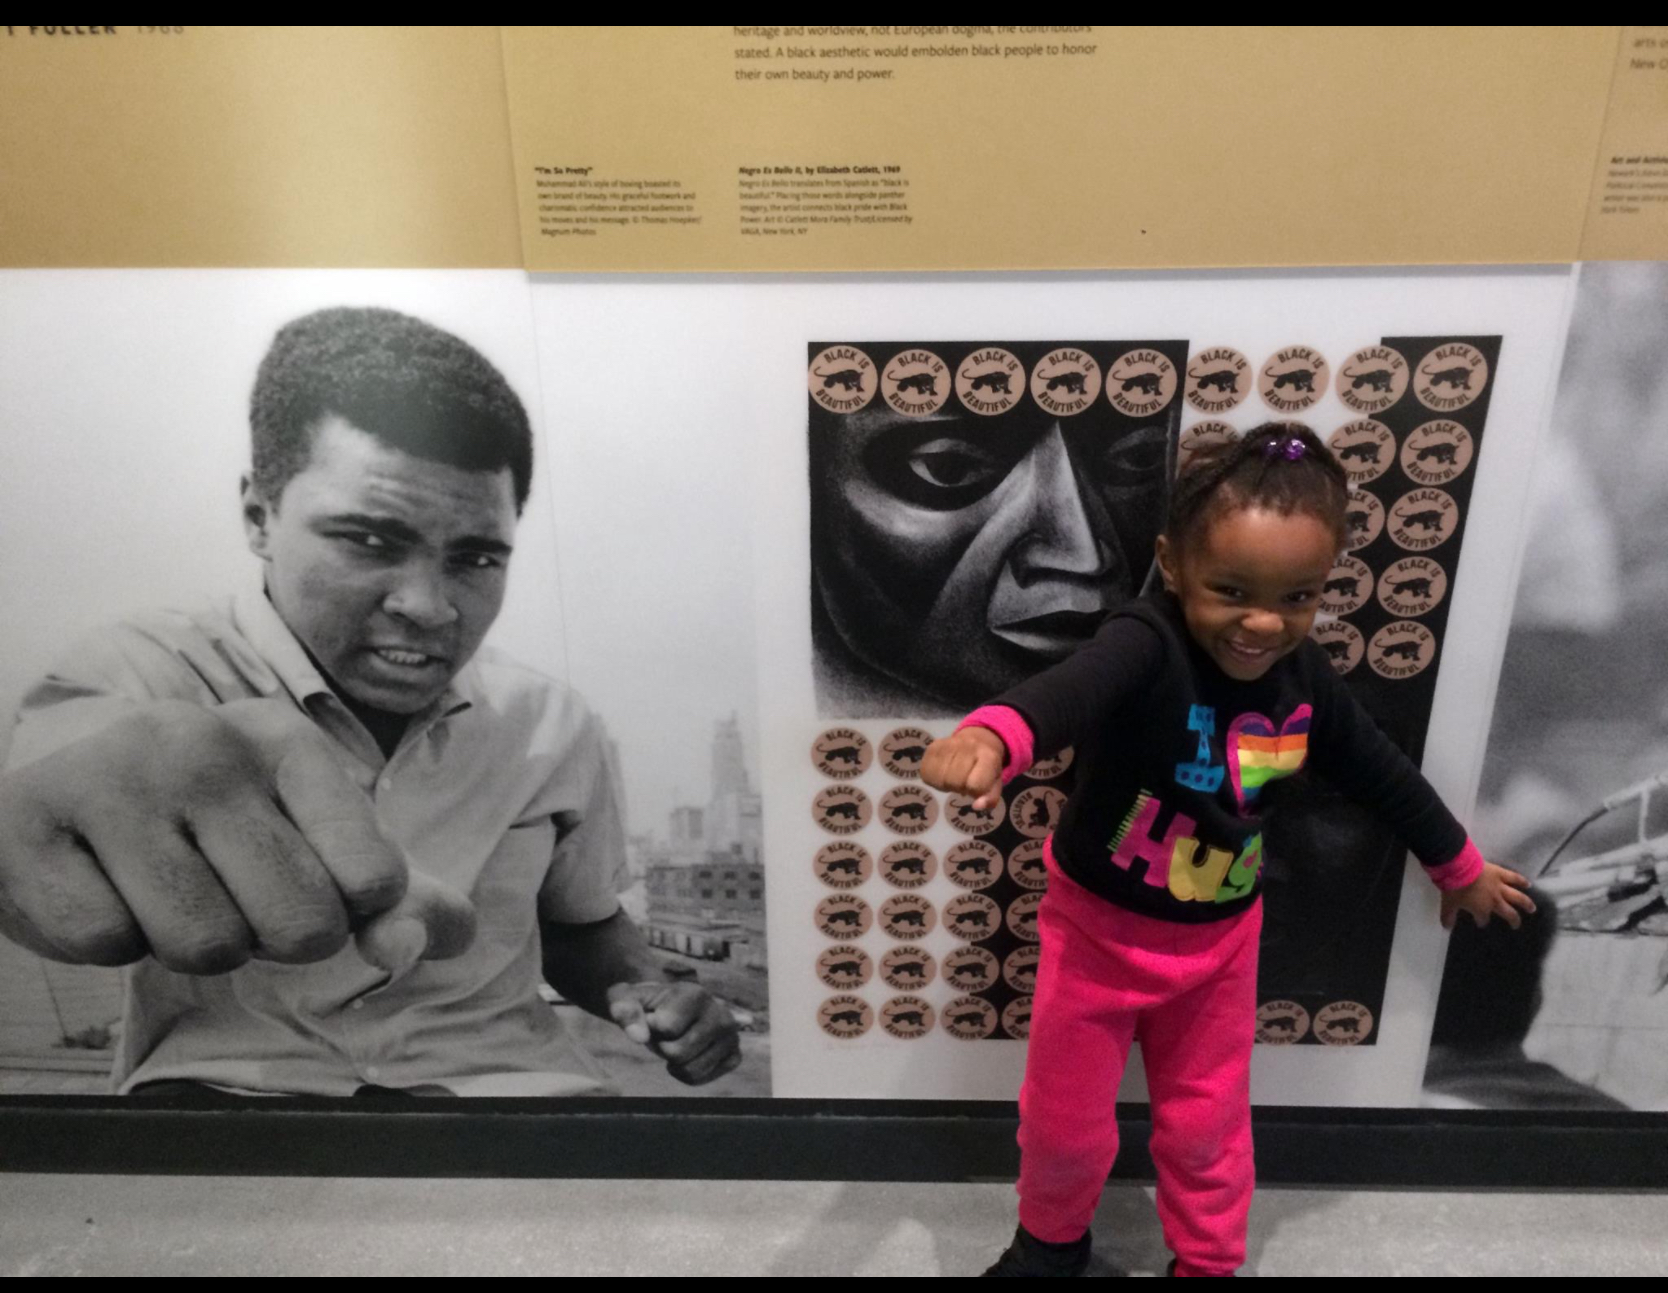 Photo of Muhammad Ali to the left with a young girl wearing pink pants and a black shirt imitating the photo to her right.